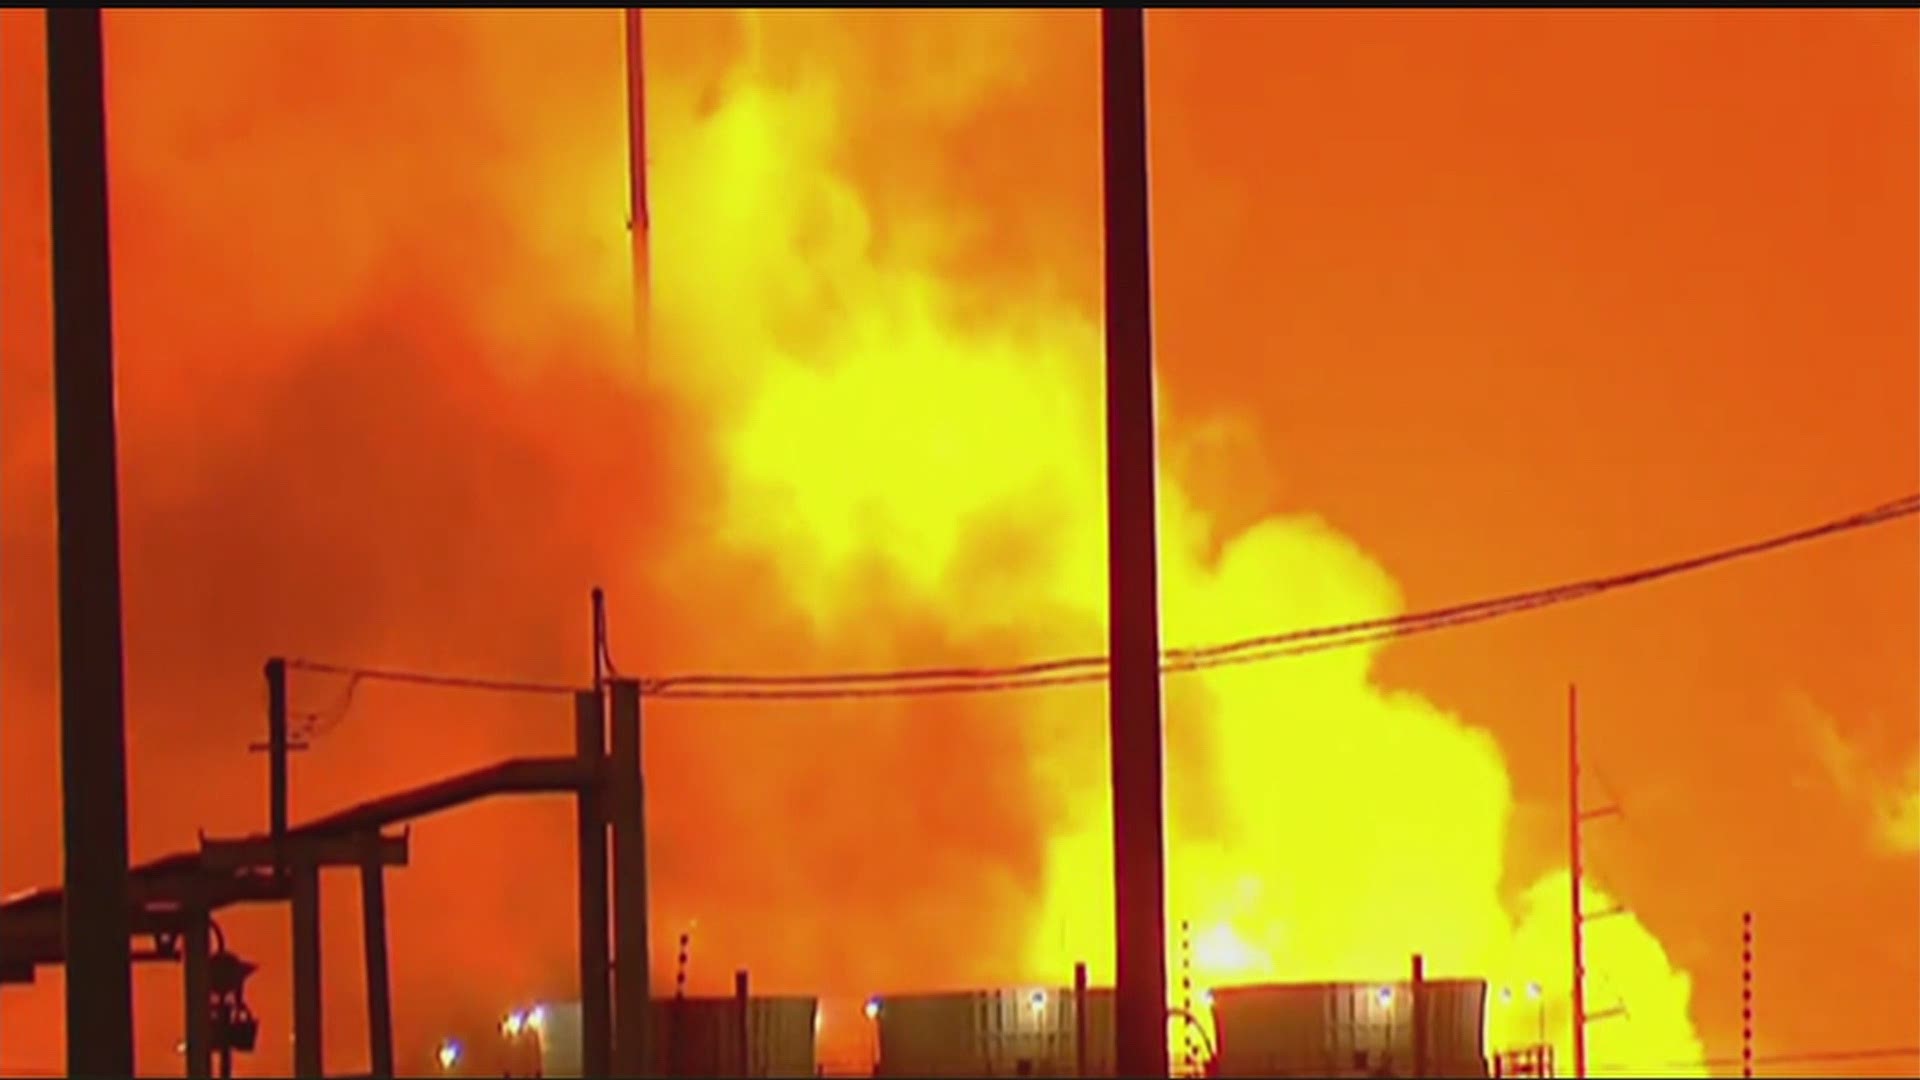 ExxonMobil Baton Rouge posted on Twitter its fire crew had the blaze contained to the area where it occurred. Video: WBRZ via CBS